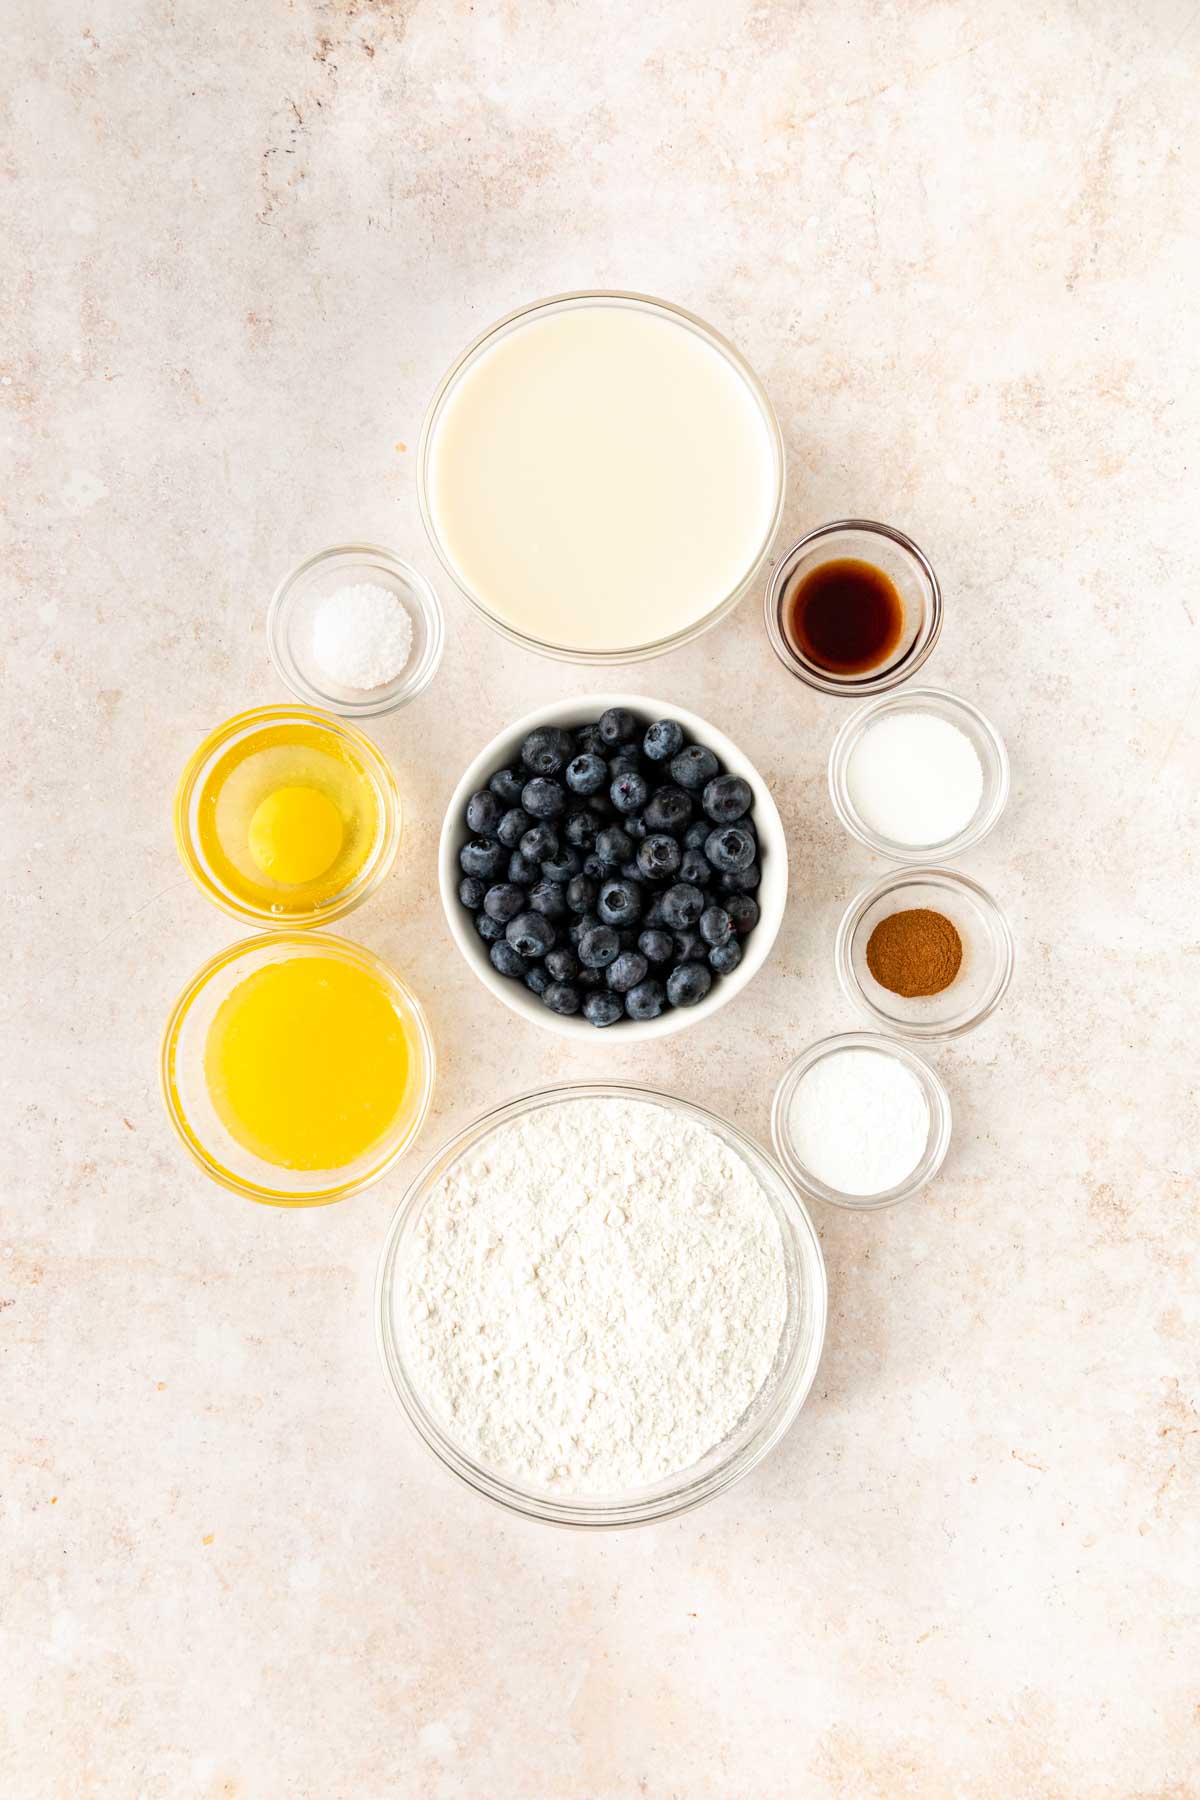 Blueberry Pancakes ingredients in bowls